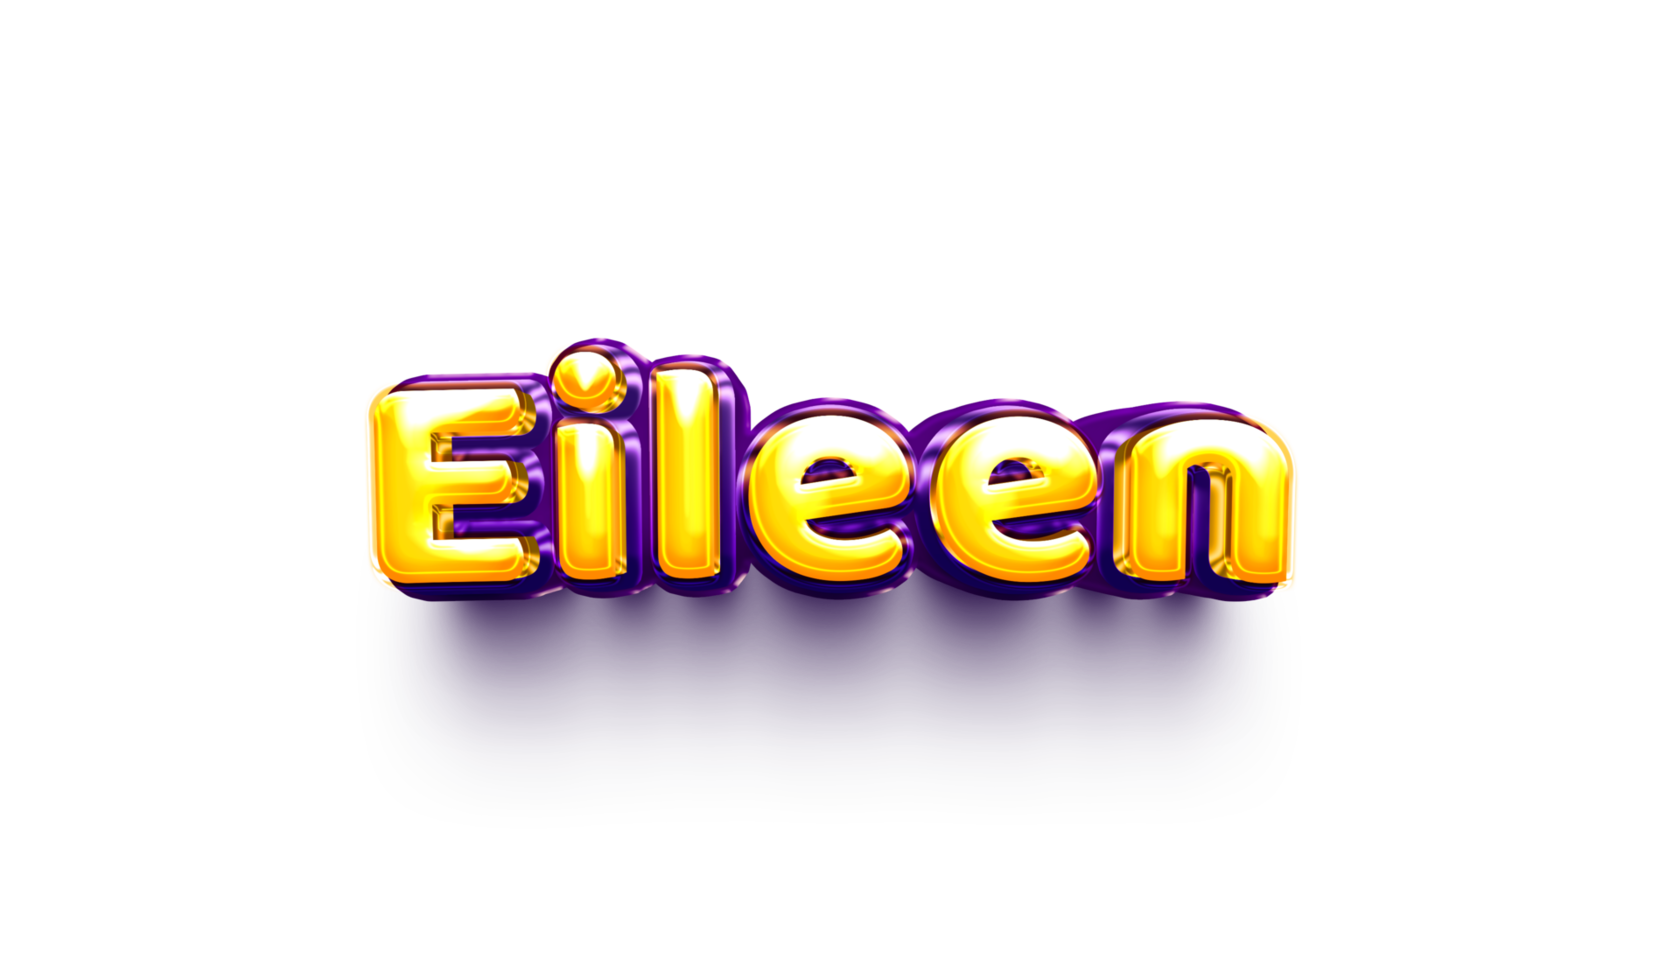 names of girls English helium balloon shiny celebration sticker 3d inflated Eileen png